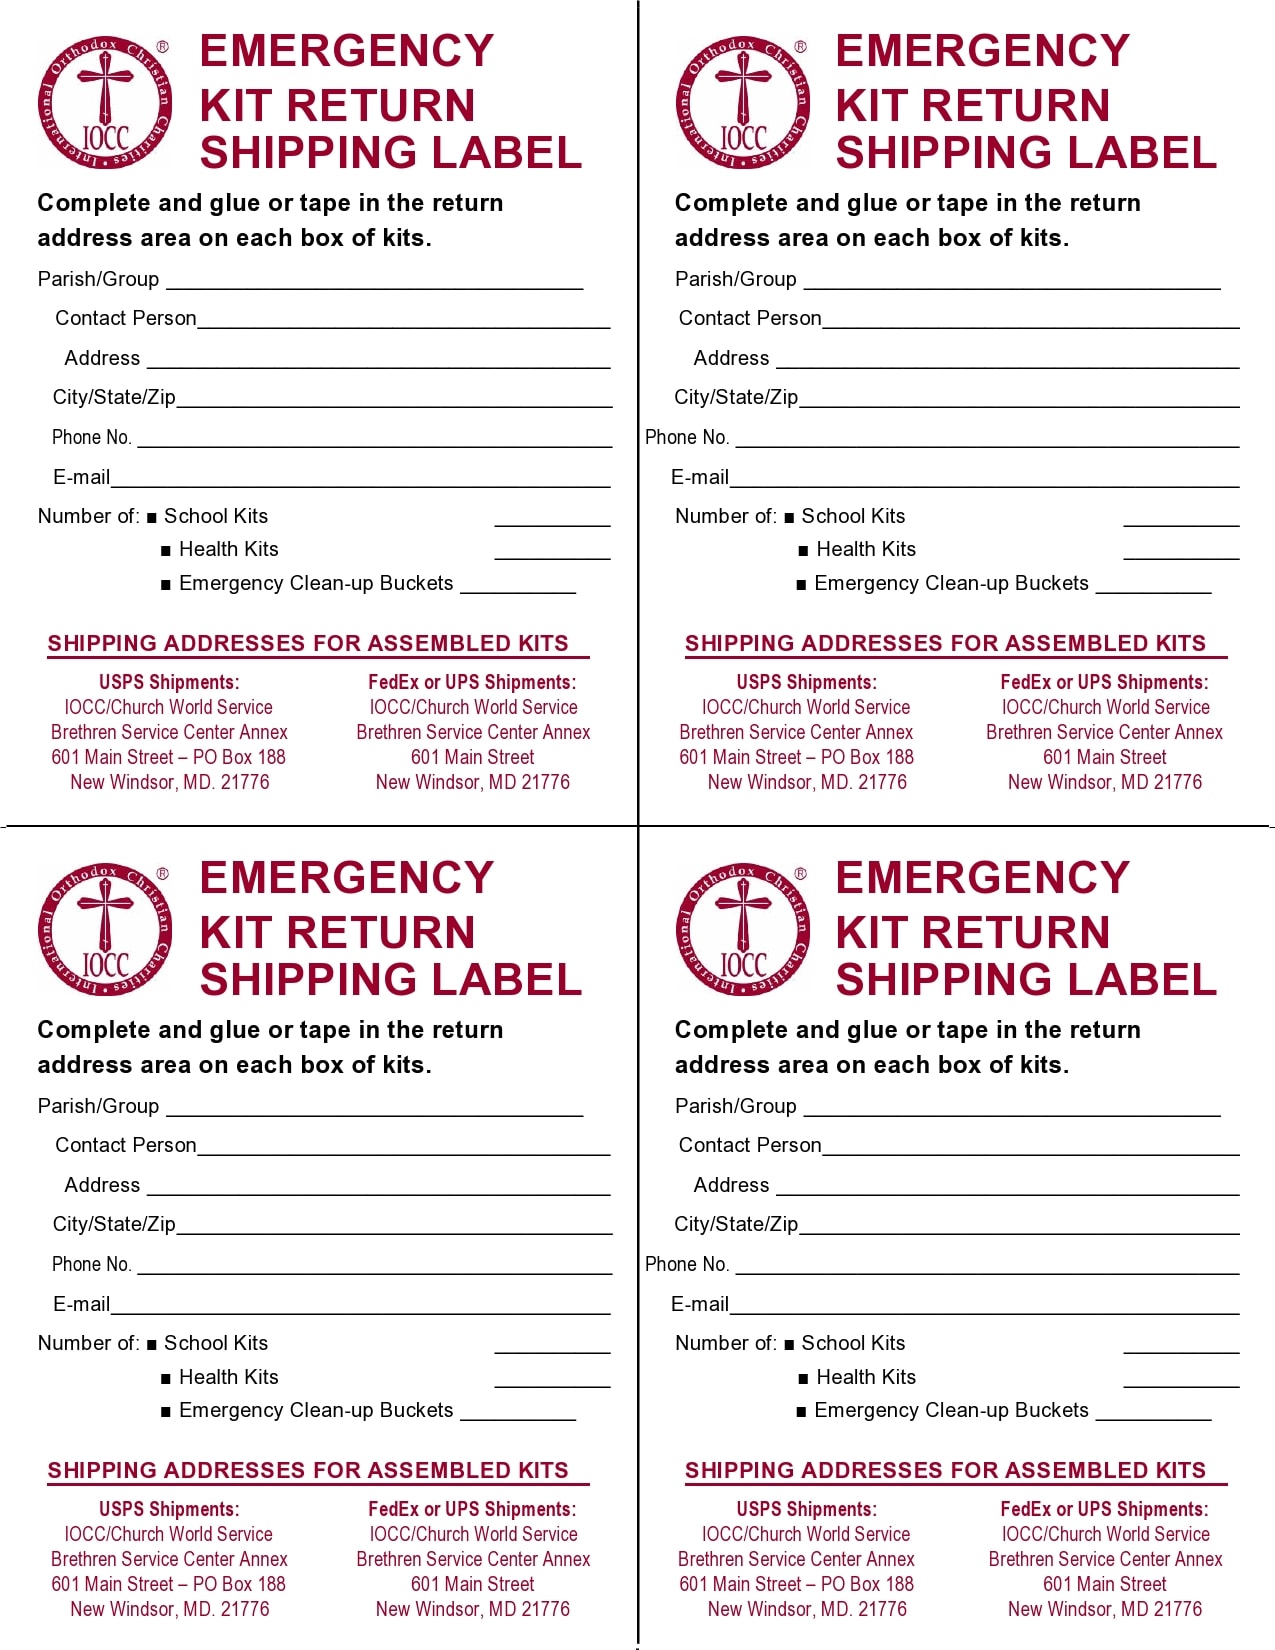 23 Printable Shipping Label Templates (Free) - PrintableTemplates For Usps Shipping Label Template Download